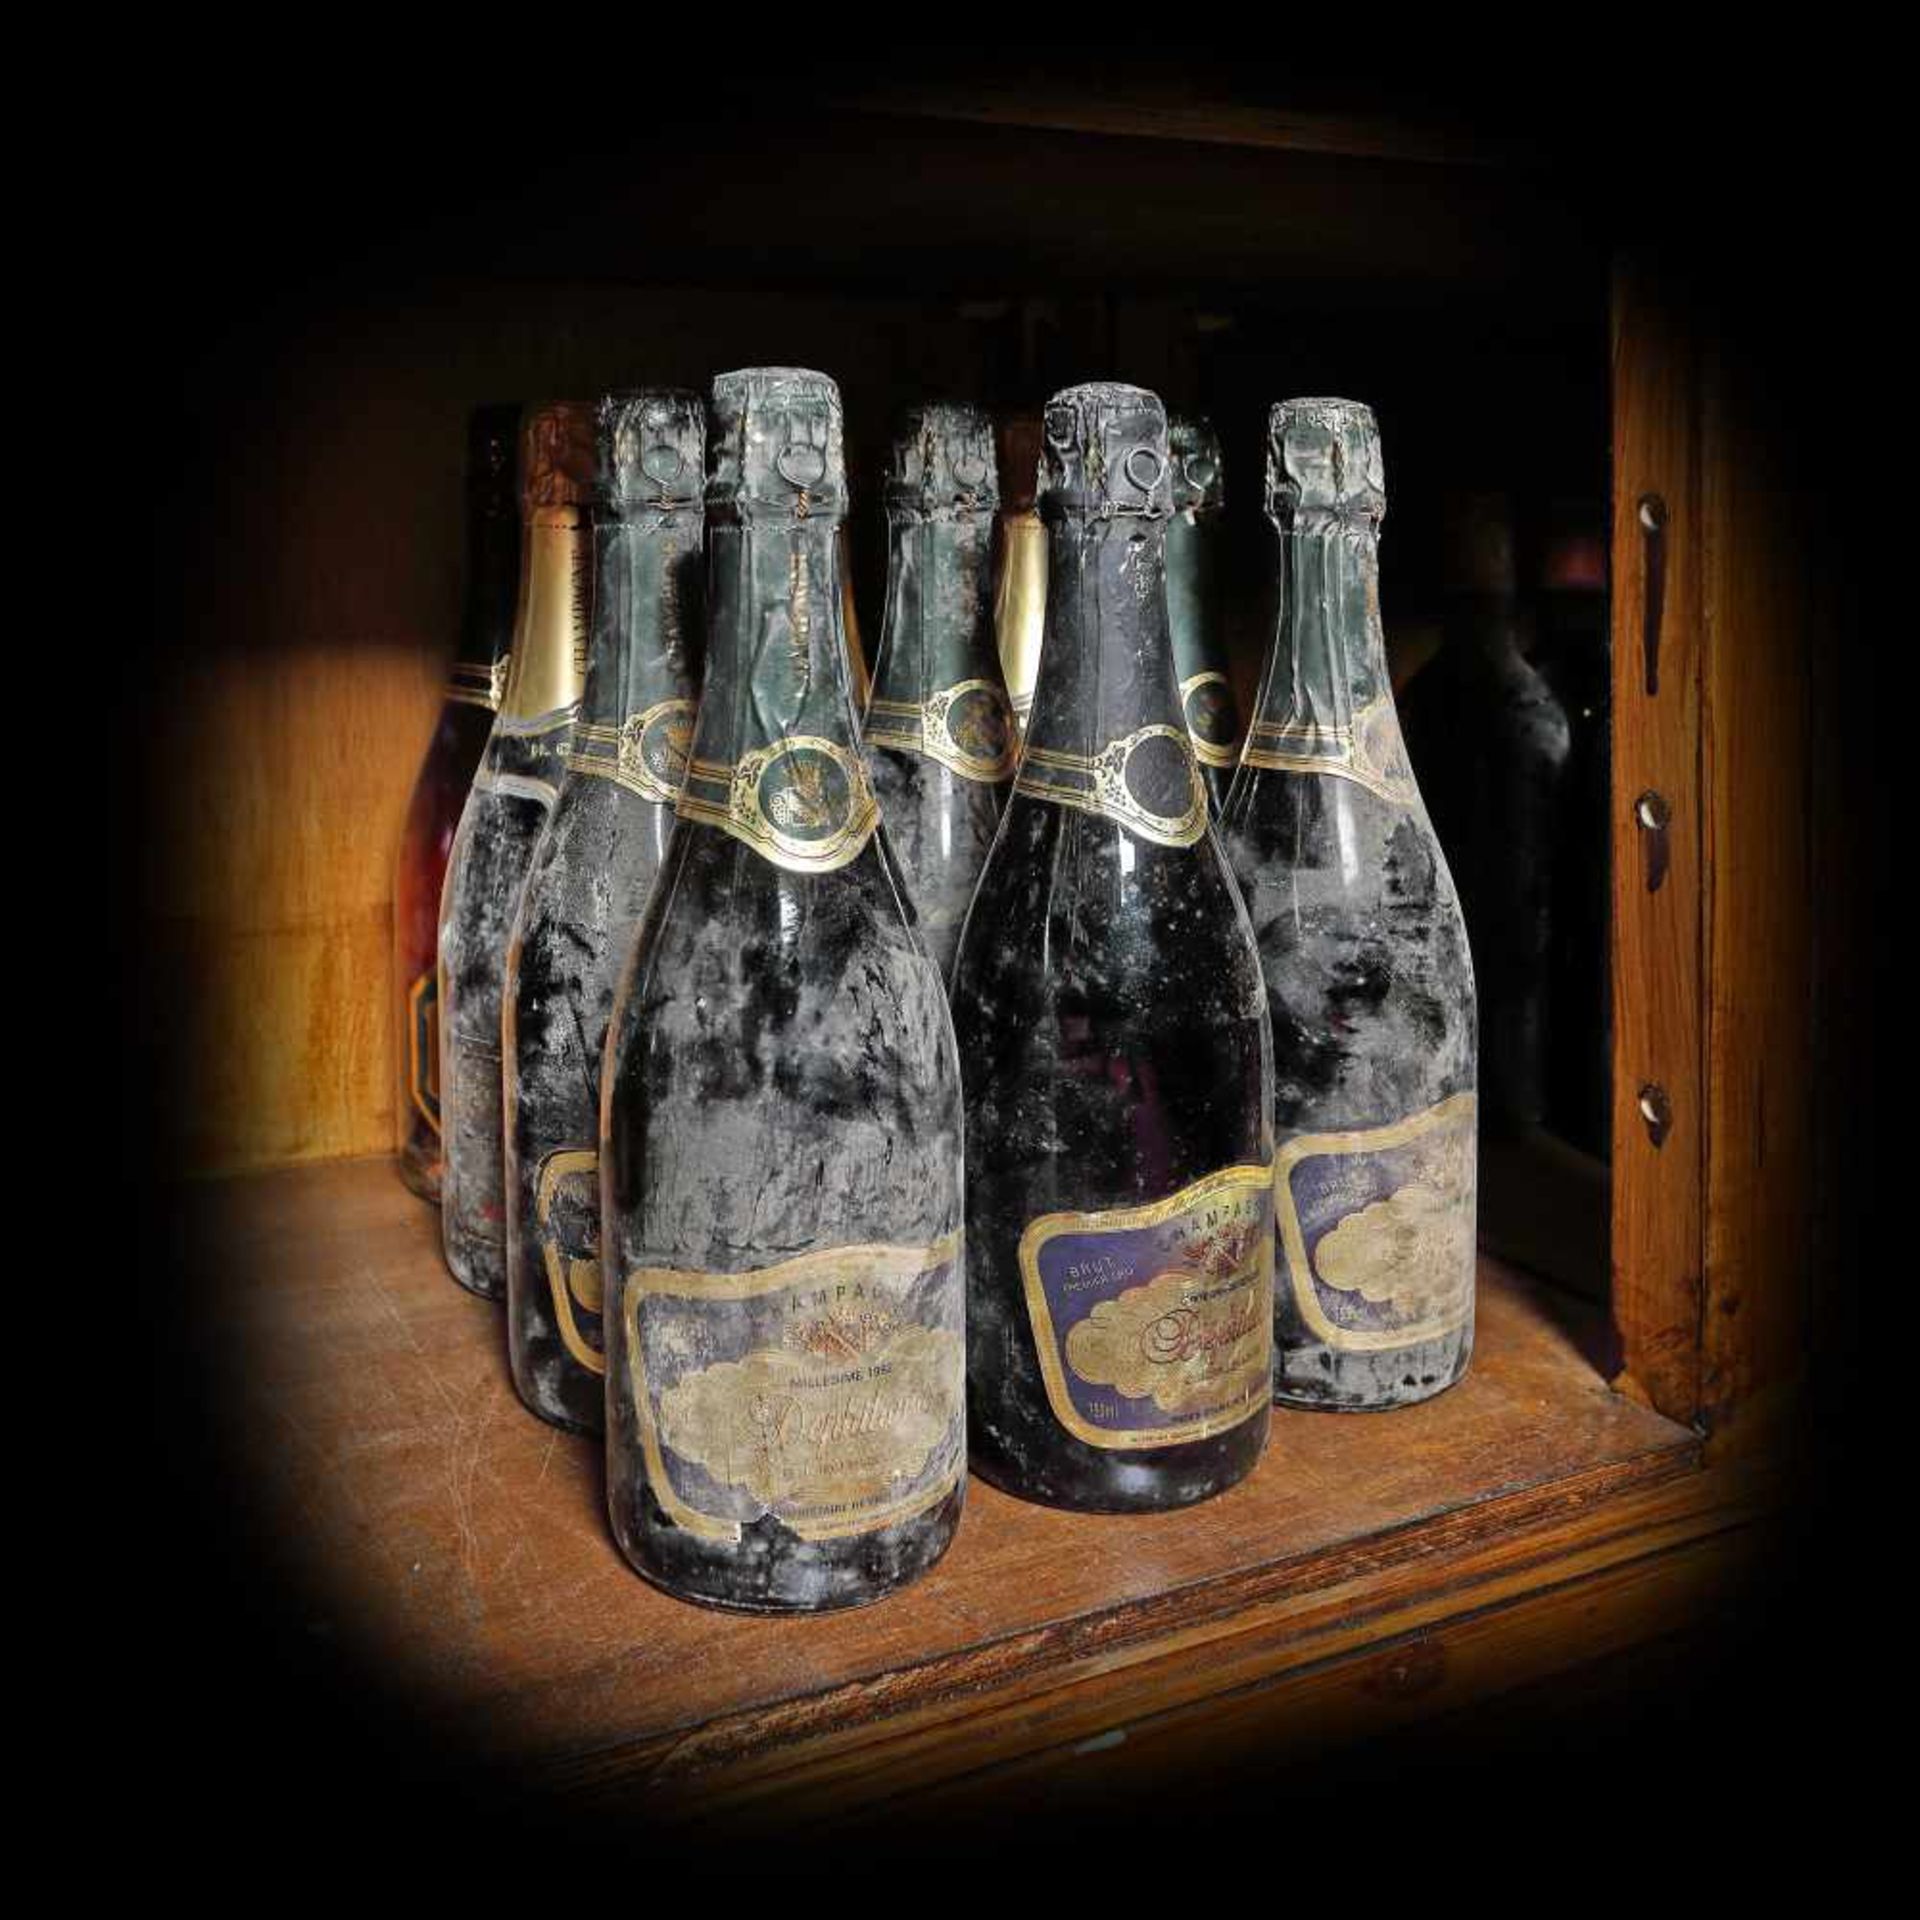 Lot of vintage Champagne, including H. Chauvet & Fils and Gil Roupsy, 12b x 0.75l